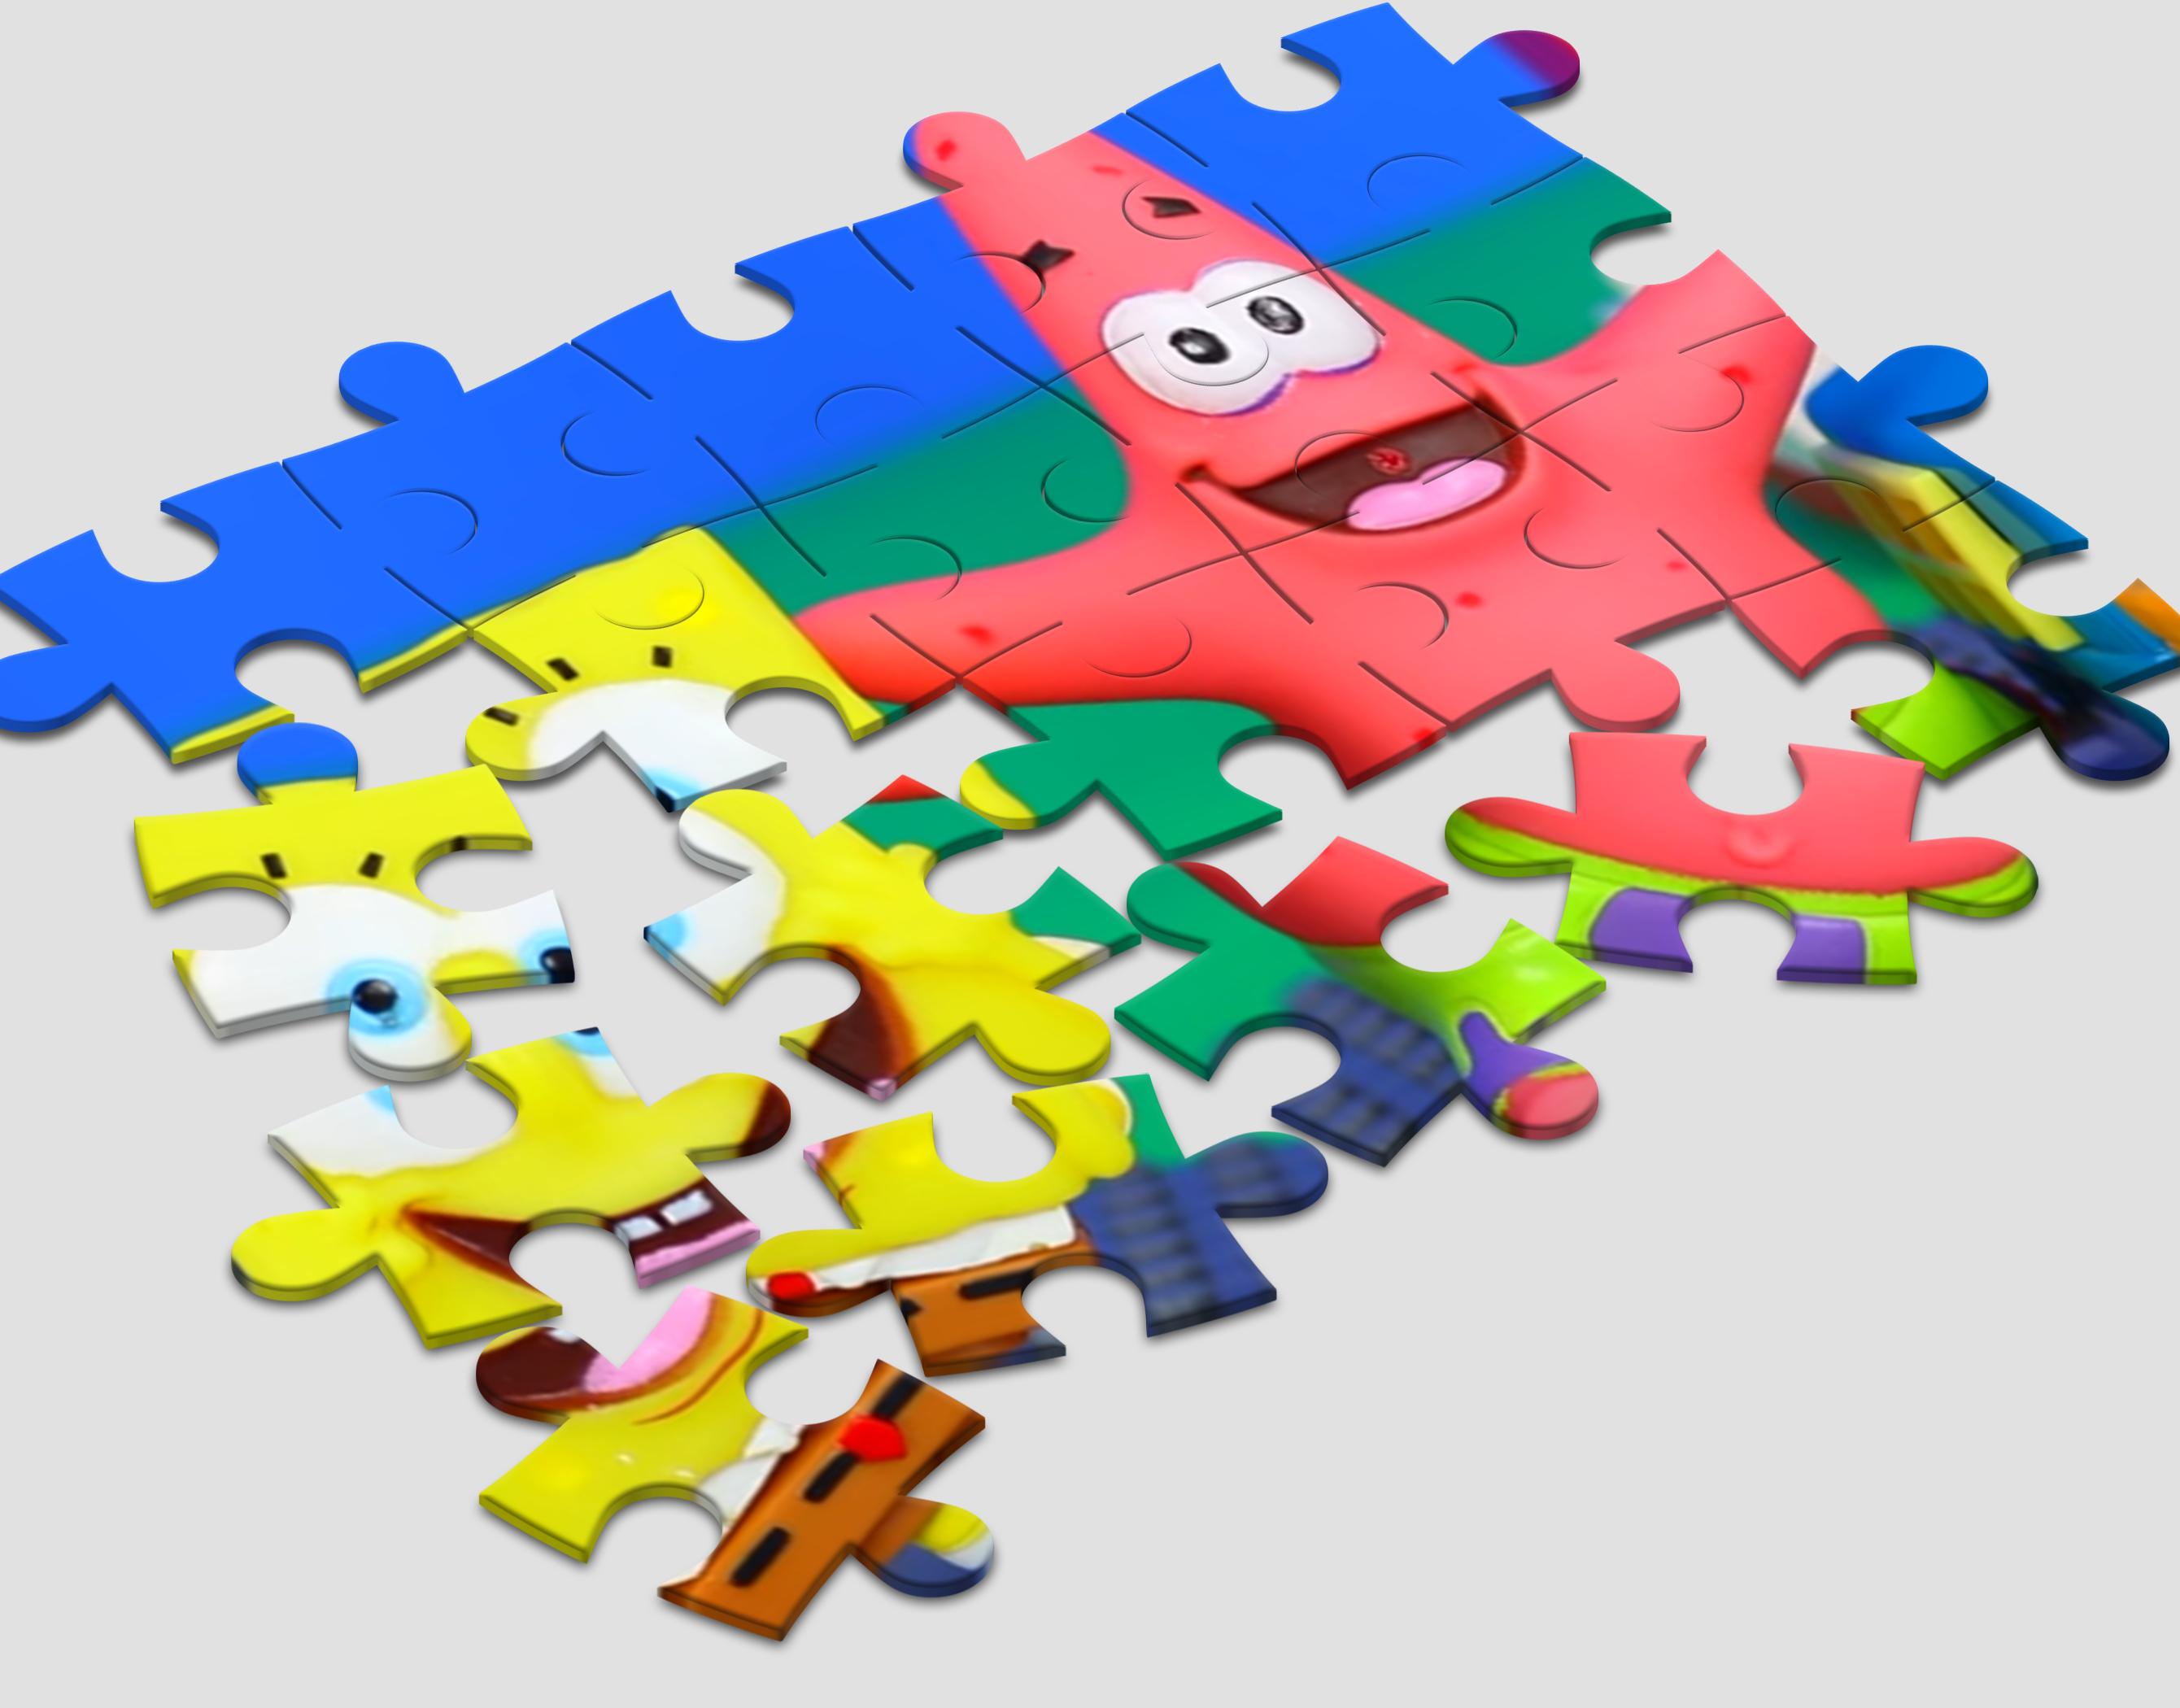 Jigsaw Spongebob Toy Kids for Android - APK Download